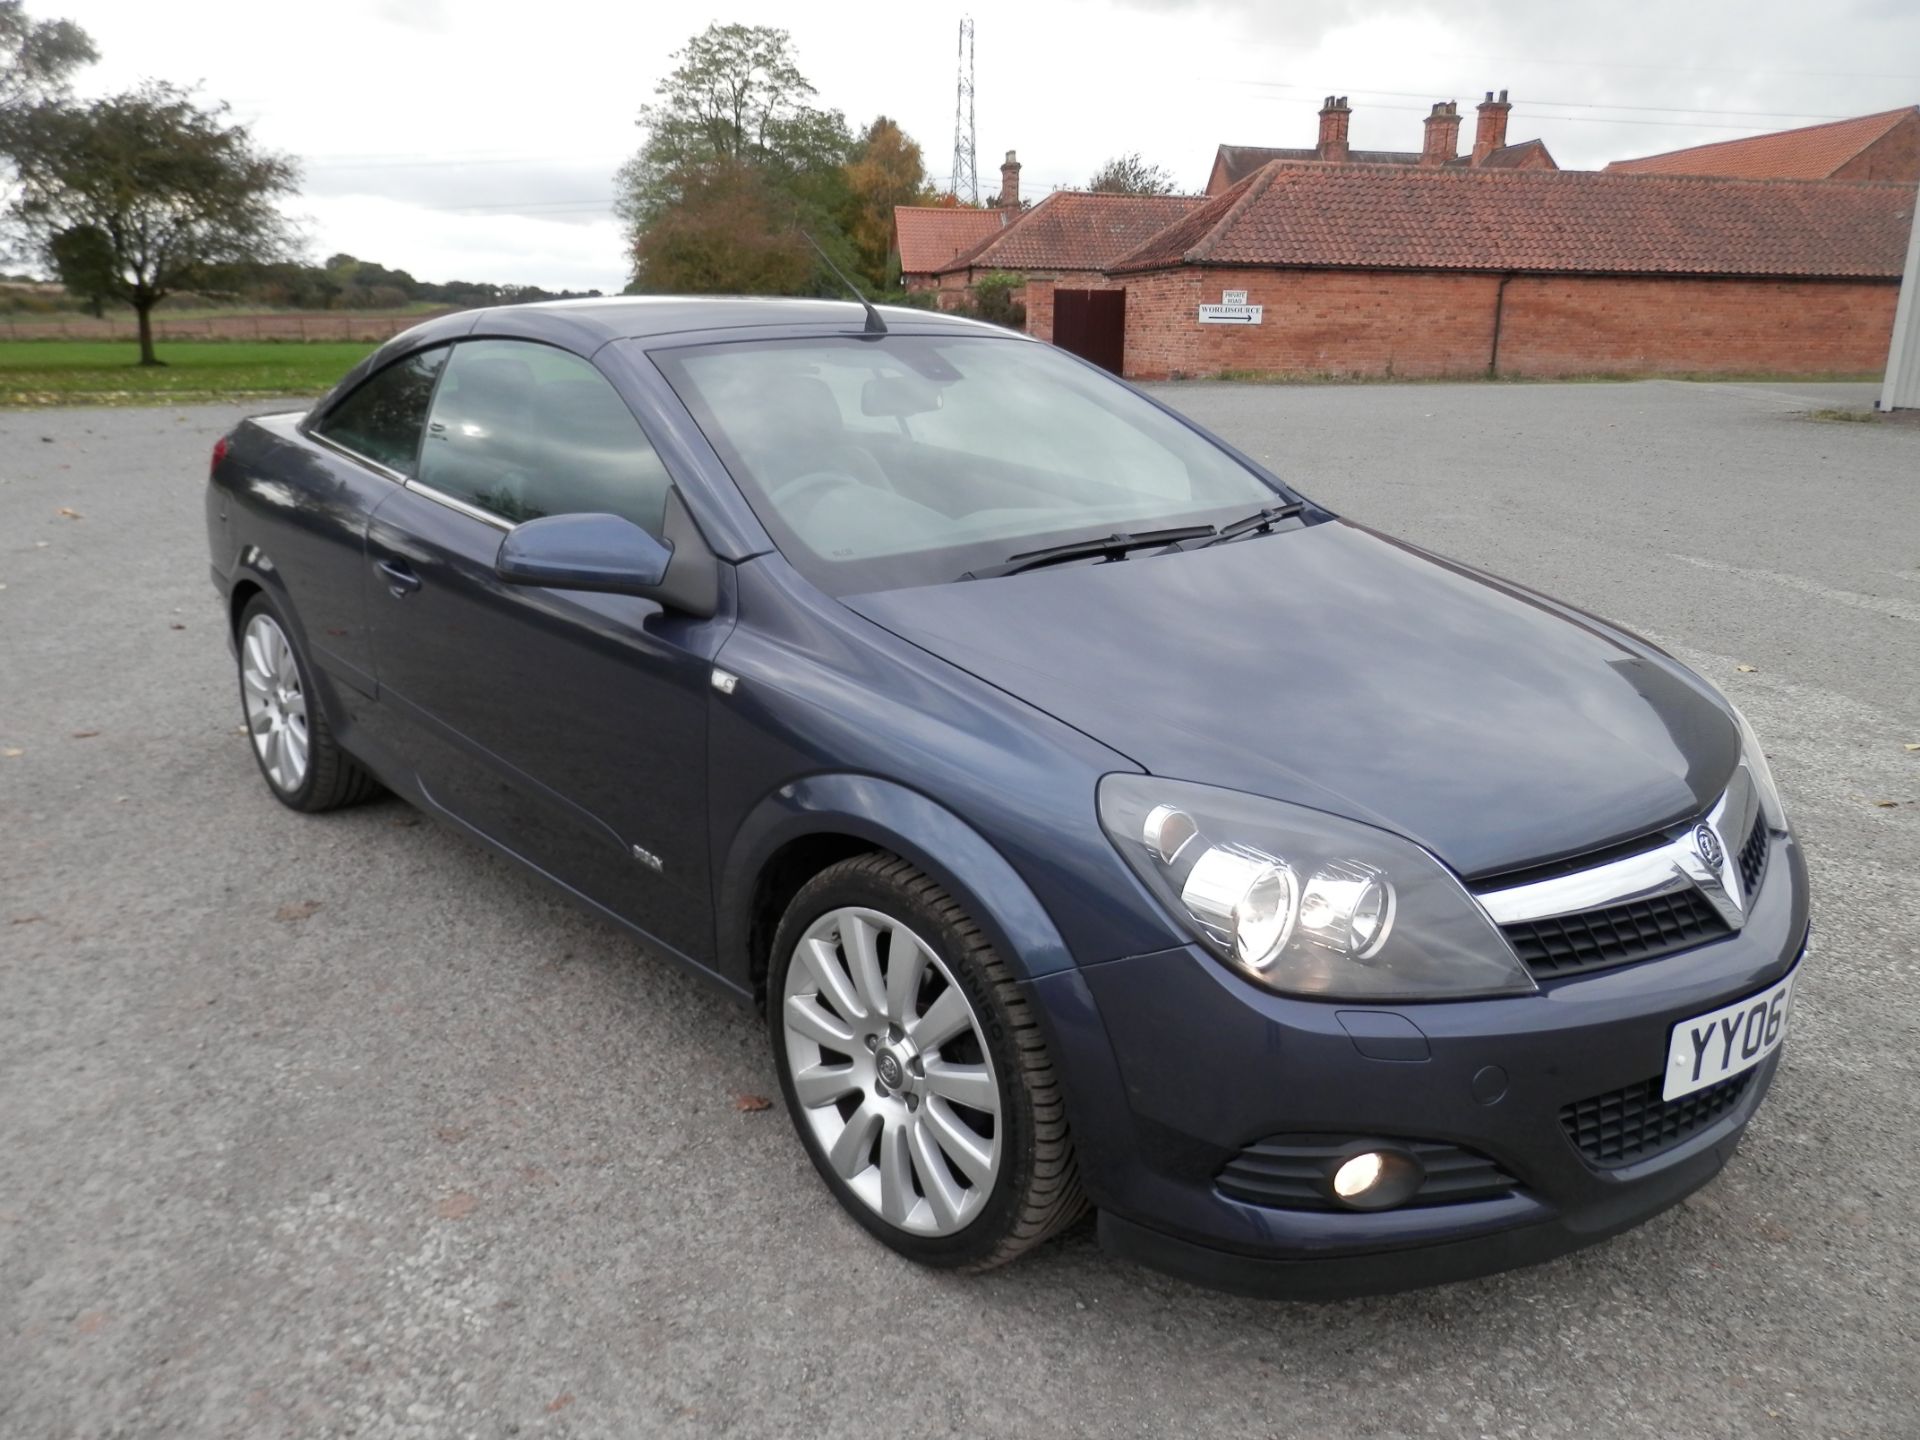 2006/06 VAUXHALL ASTRA DESIGN 1.8 SPORT TWIN TOP CONVERTIBLE, ONLY 62K MILES WARRANTED, MOT FEB 2017